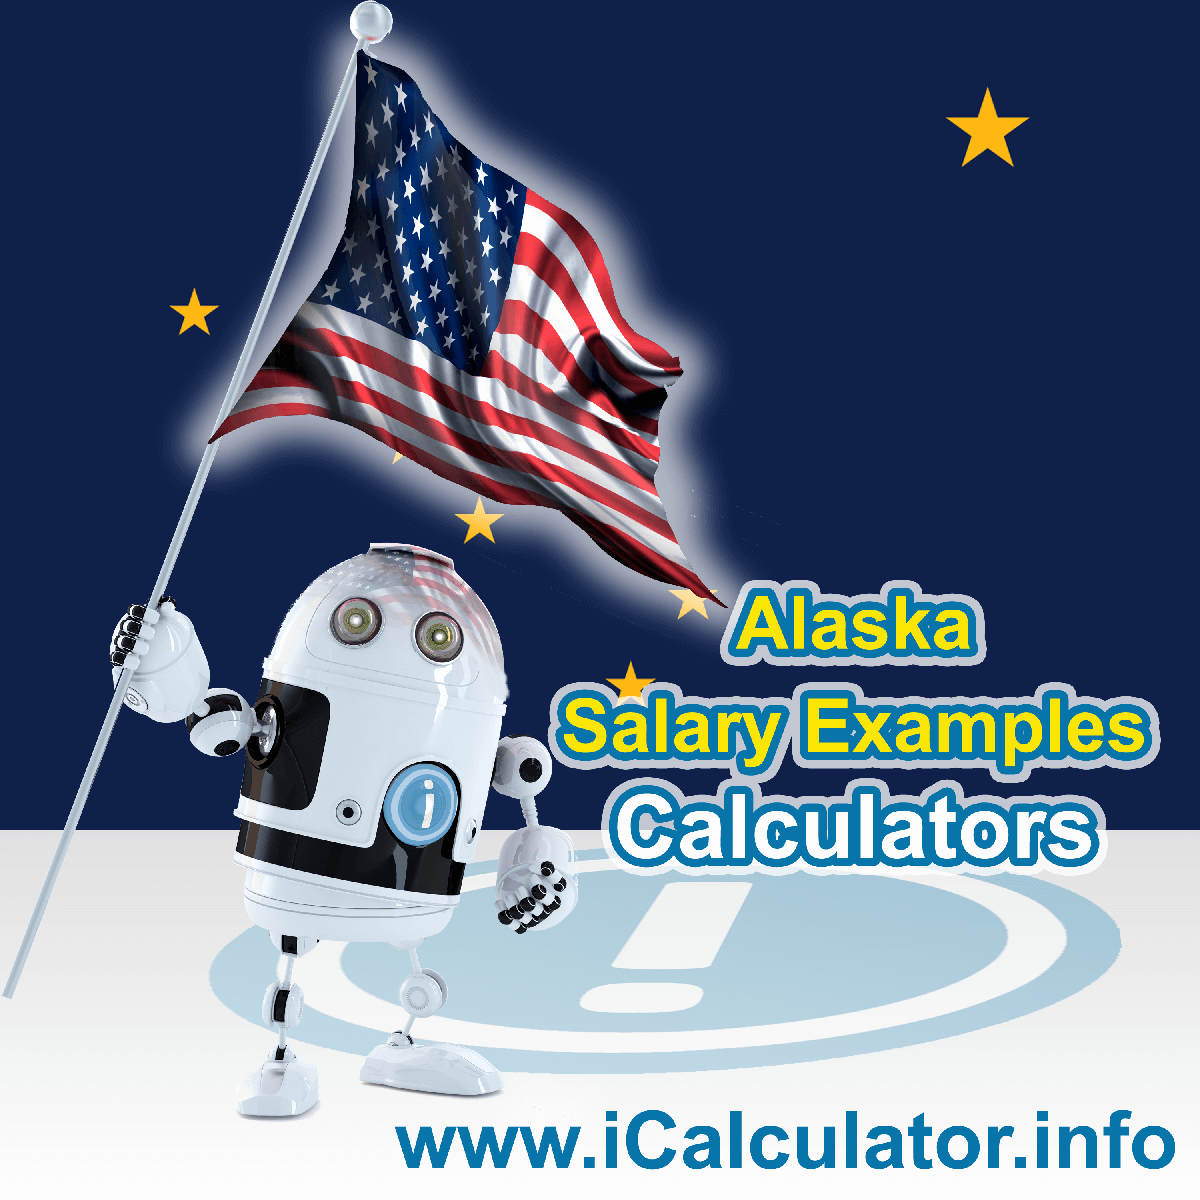 Alaska Salary Example for $ 45,000.00 in 2023 | iCalculator™ | $ 45,000.00 salary example for employee and employer paying Alaska State tincome taxes. Detailed salary after tax calculation including Alaska State Tax, Federal State Tax, Medicare Deductions, Social Security, Capital Gains and other income tax and salary deductions complete with supporting Alaska state tax tables 